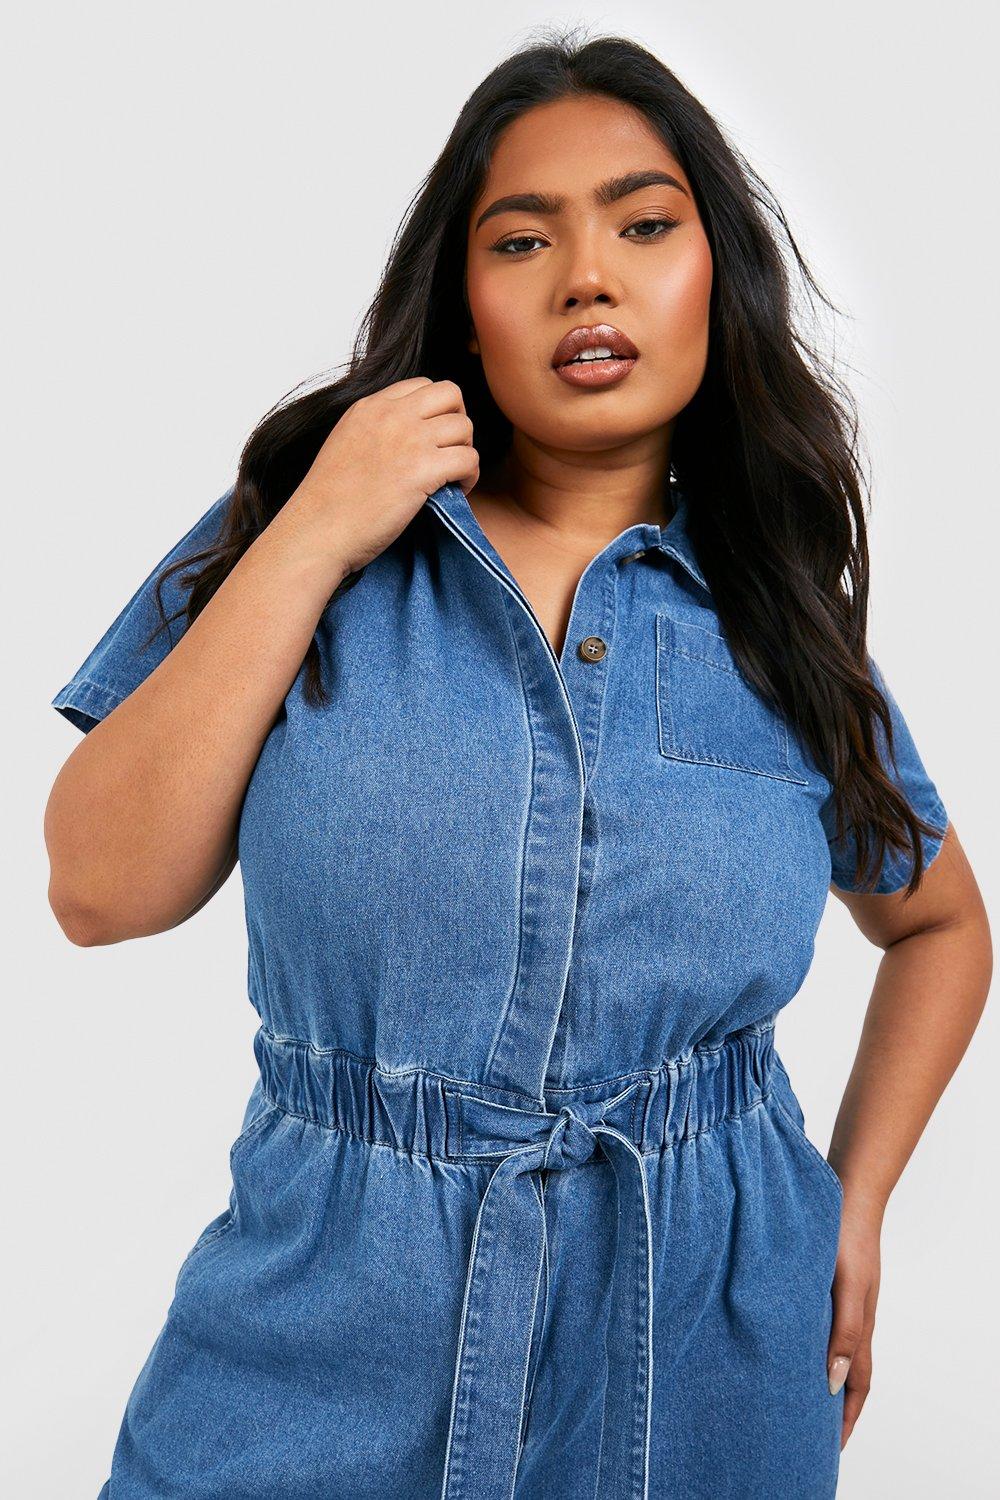 Denim Denim Jumpsuit Shorts With Front Flap And Pocket For Women Casual  Style, Short Overalls, Washed Jeans, Plus Size P149 From Zanzibar, $19.5